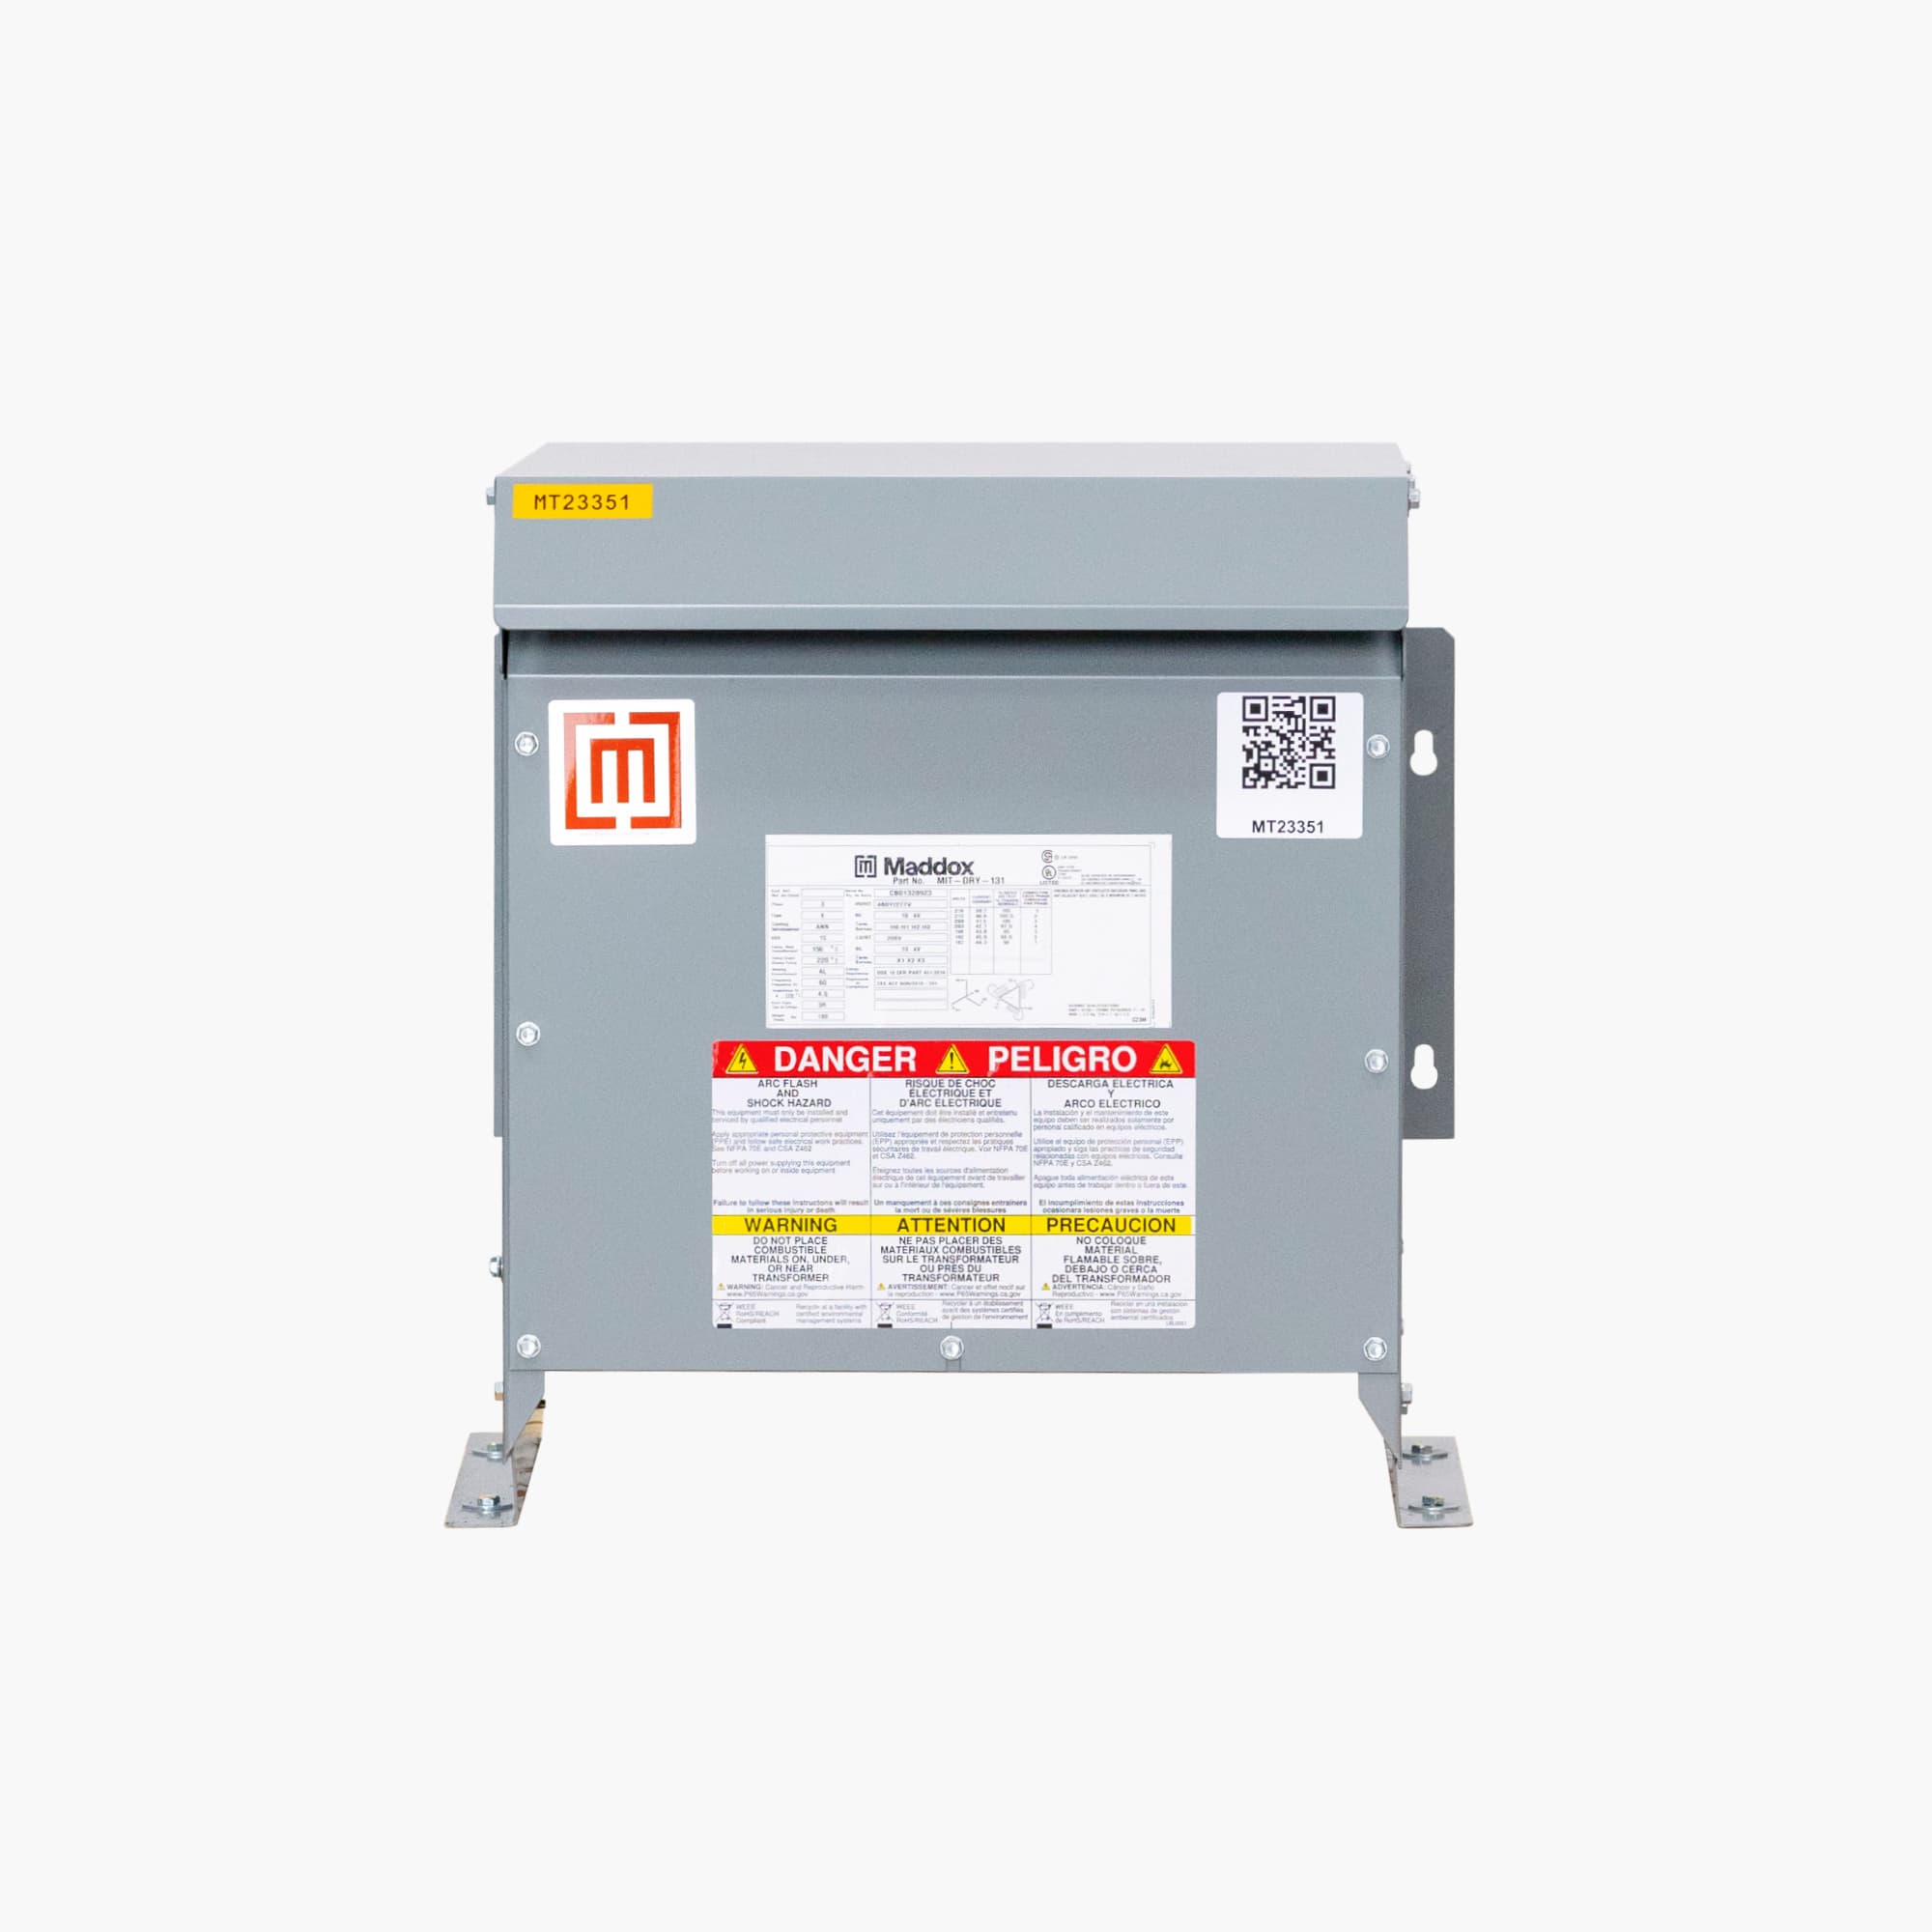 3-Phase 480 D - 240 Y 139 (Drive Isolation Transformer)